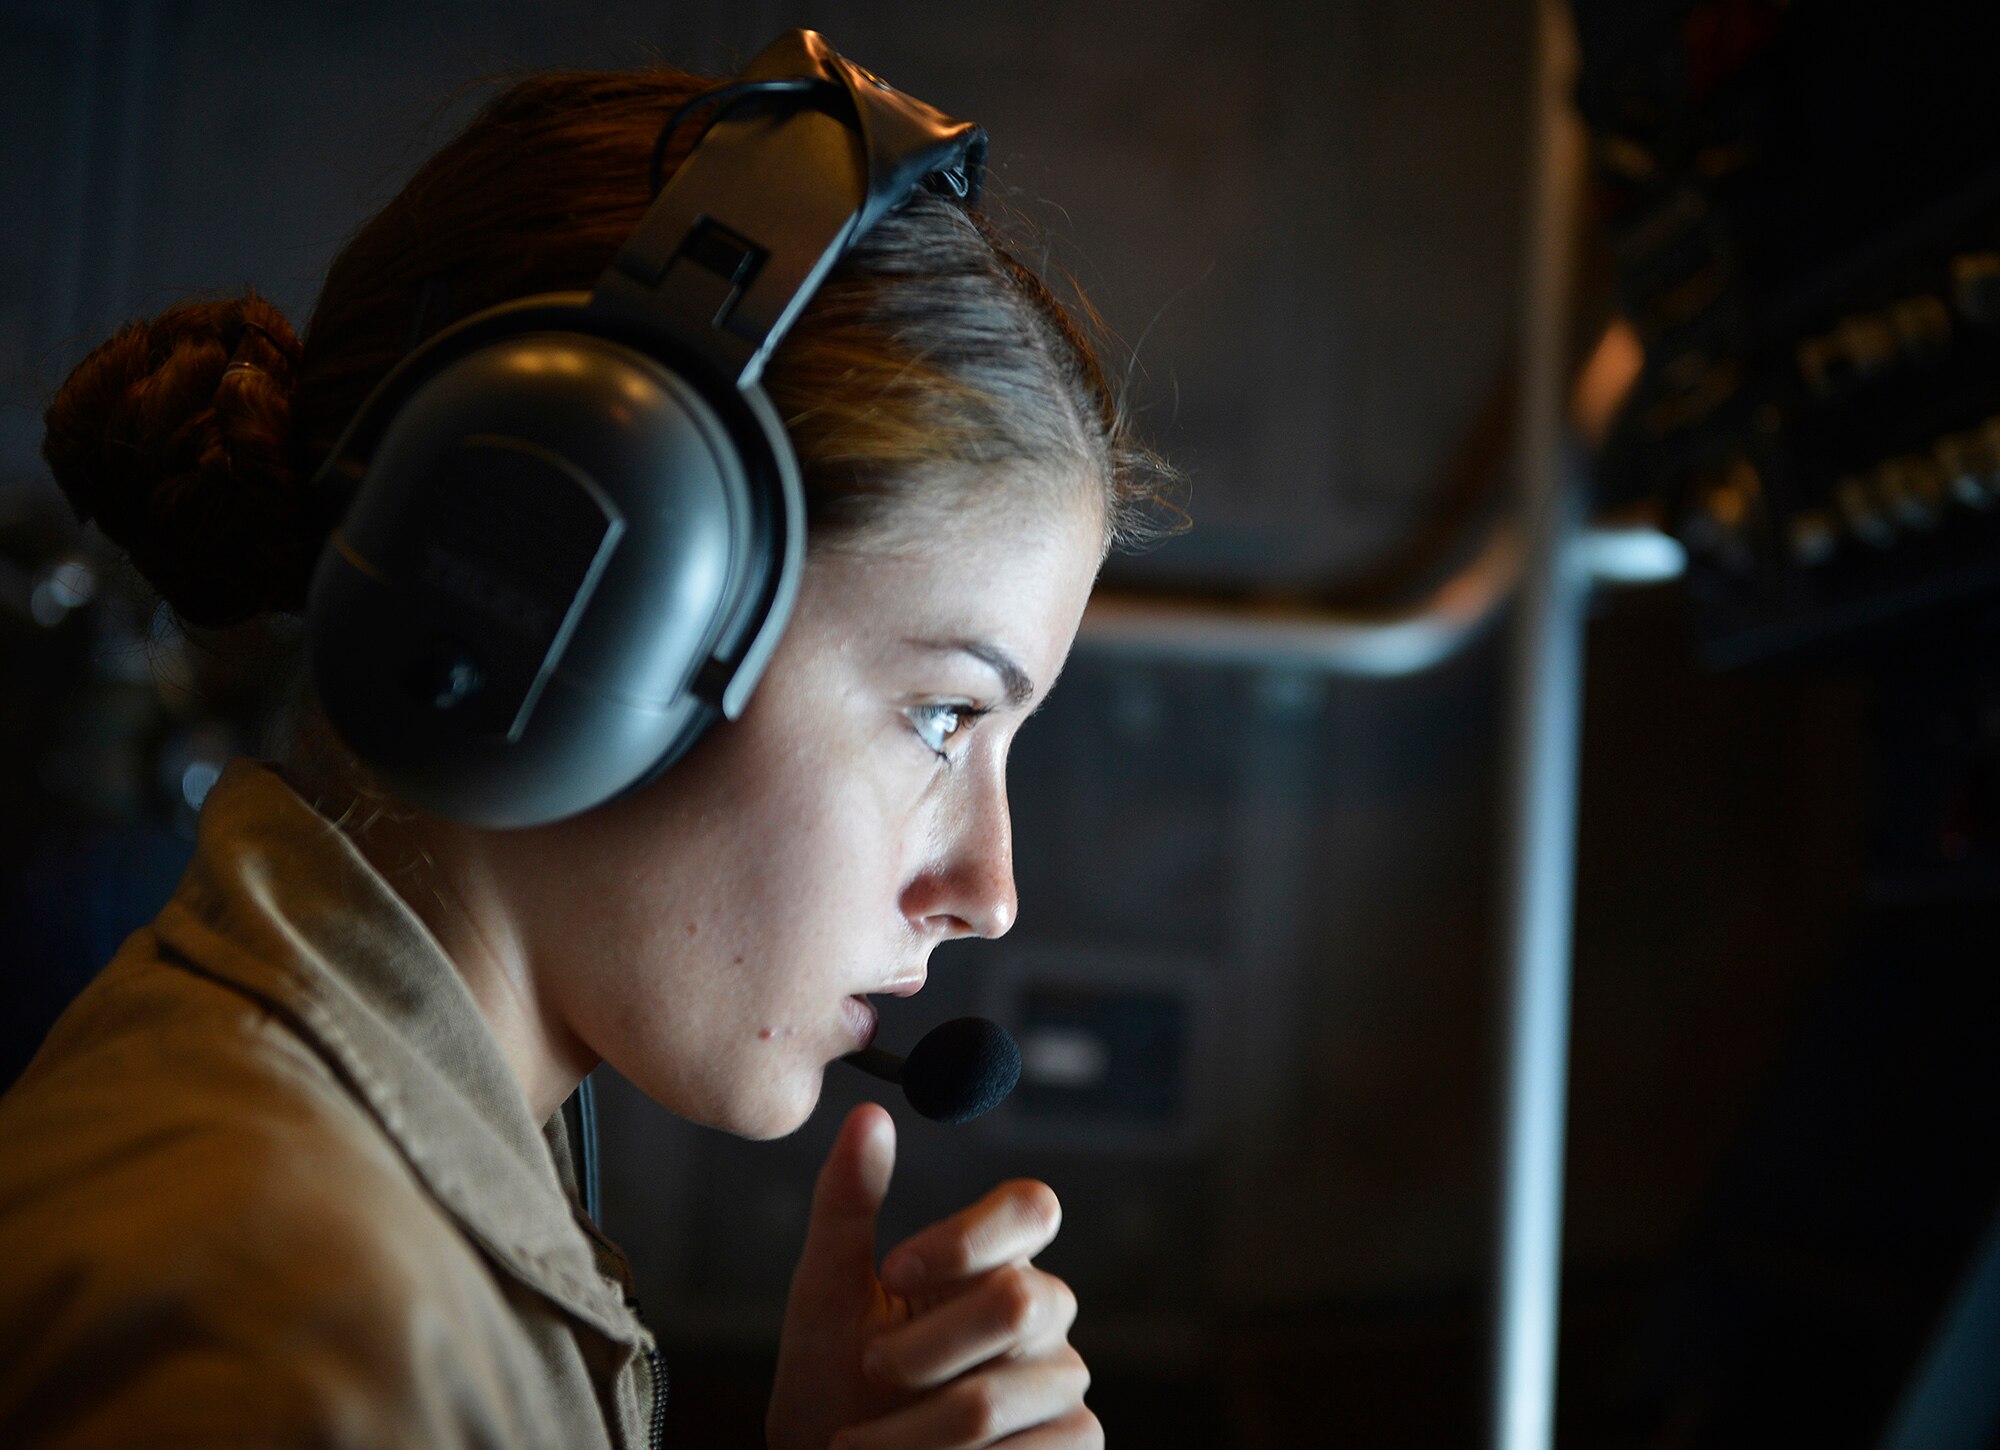 Airman 1st Class Mallory, 908th Air Refueling Squadron KC-10 Extender boom operator, prepares to refuel an aircraft in the U.S. Air Forces Central Command area of responsibility July 13, 2016. The KC-10 can refuel a wide variety of aircraft using both boom and drogue capabilities. (U.S. Air Force photo by Tech. Sgt. Chad Warren/released)